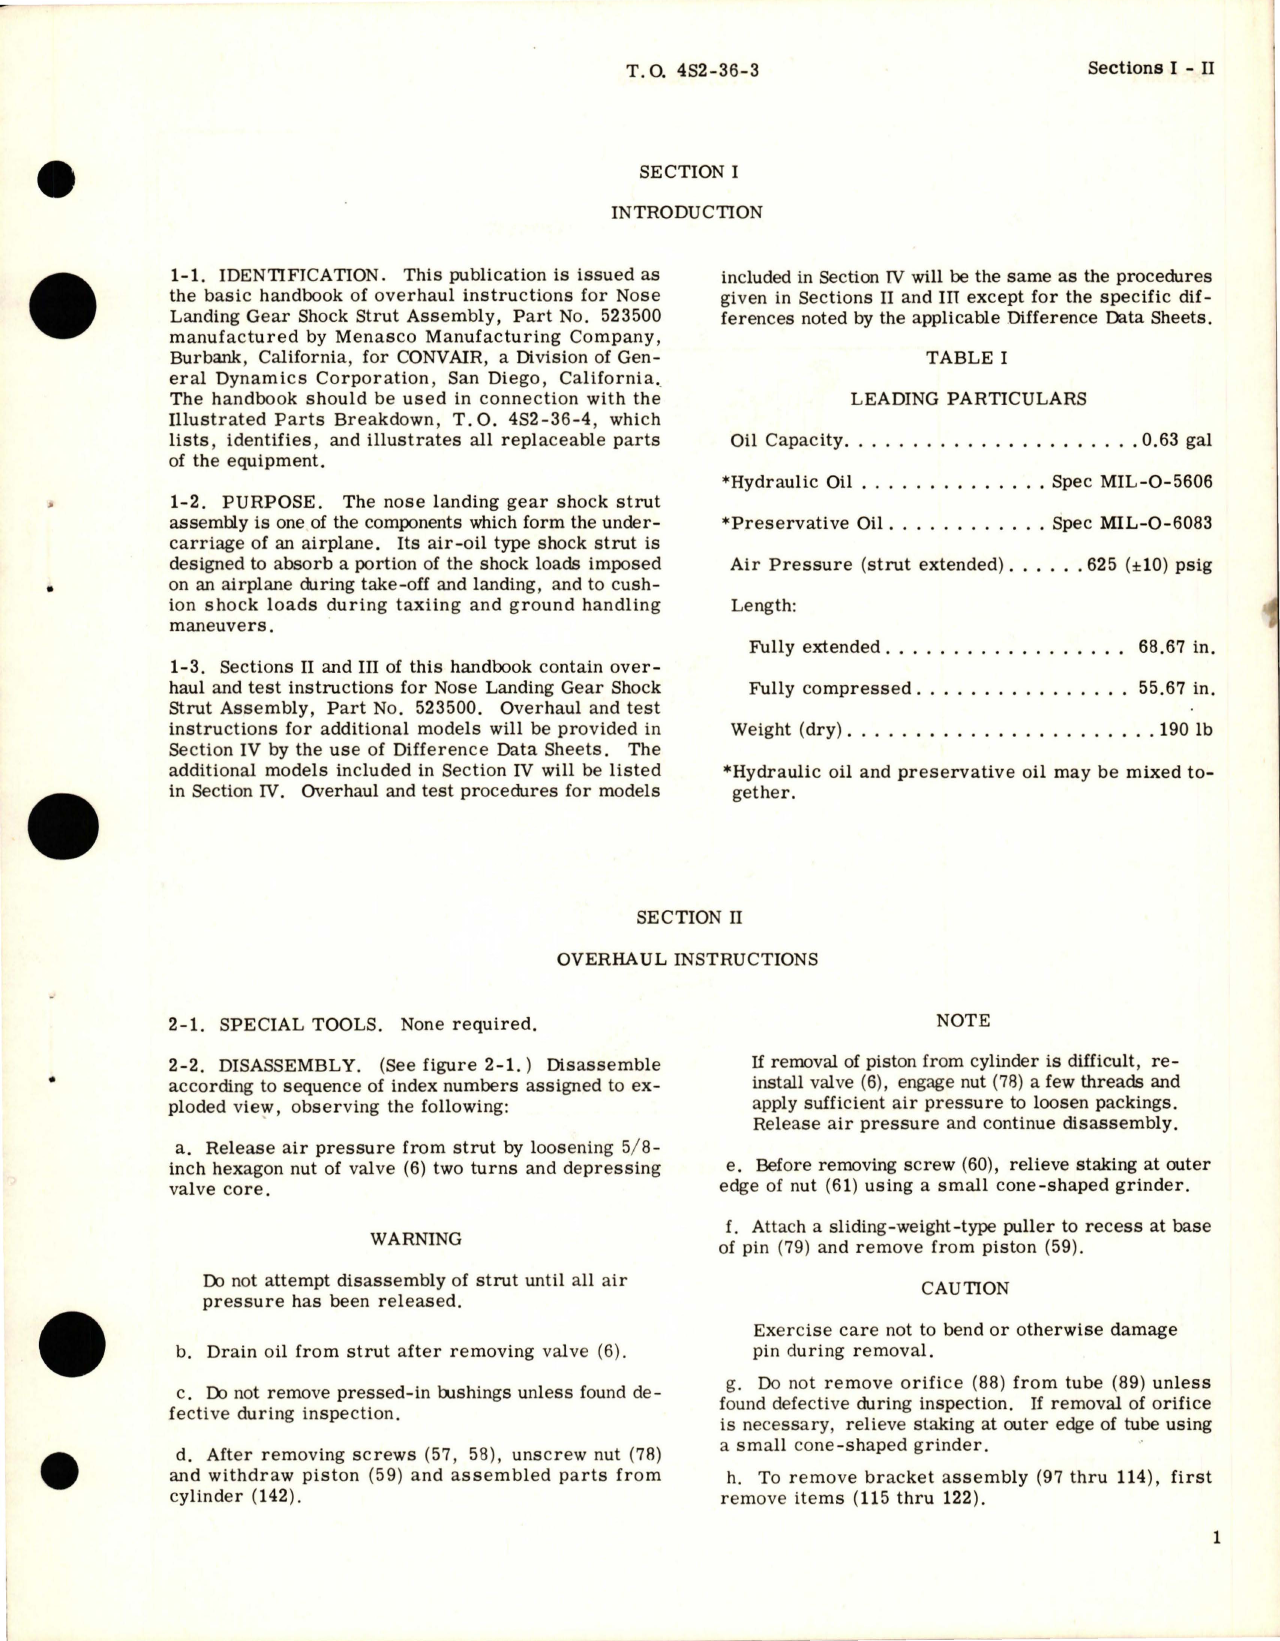 Sample page 5 from AirCorps Library document: Overhaul Instructions for Nose Landing Gear Shock Strut Assembly - Part 523500 